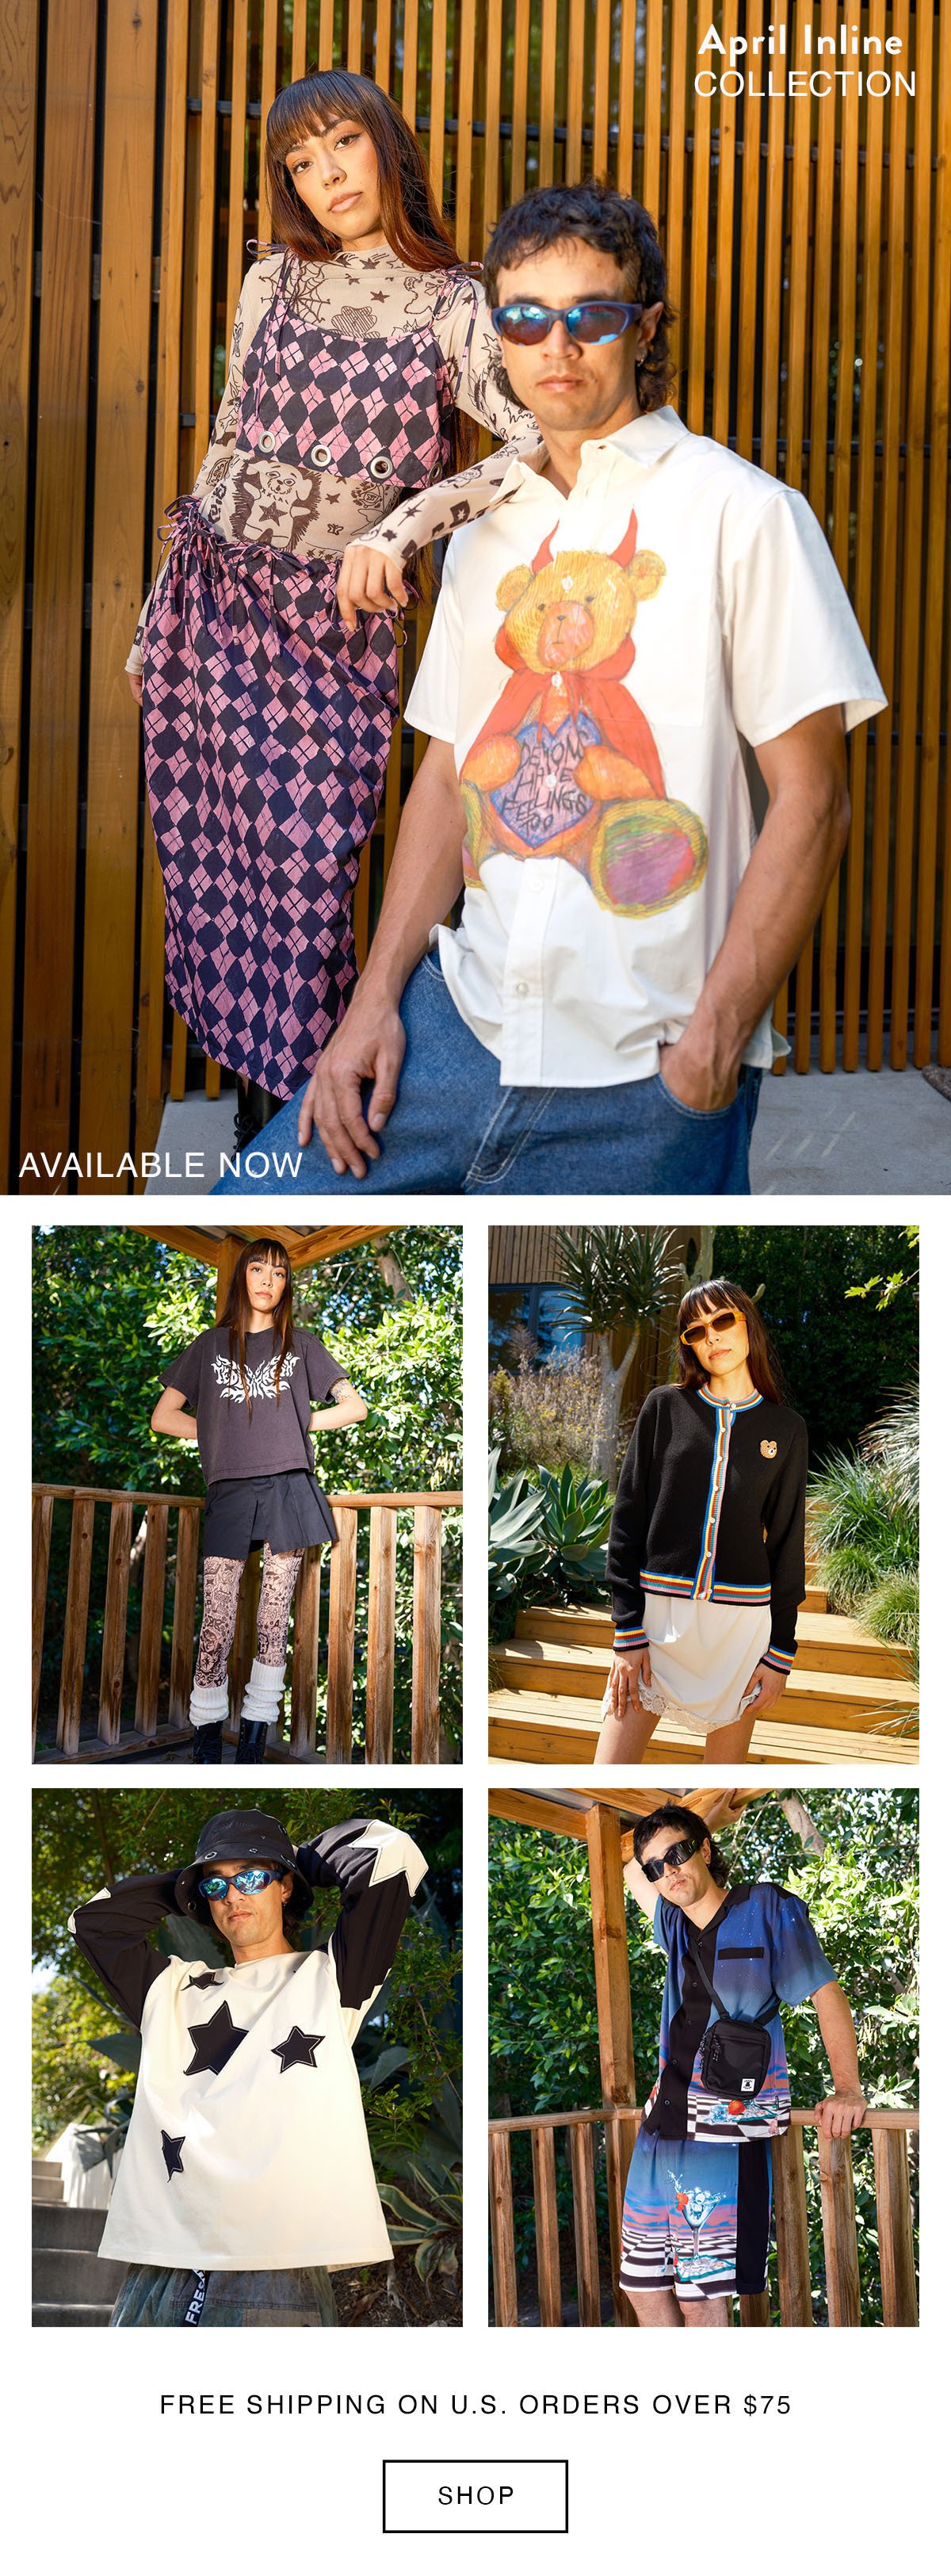 April Inline Collection Available Now. Two Models wearing various pieces from our April Collection Including our Transformable dress, Demons have feelings shirt, recycled sweater bear cardigan, dreamscape shirt and shorts, and more.